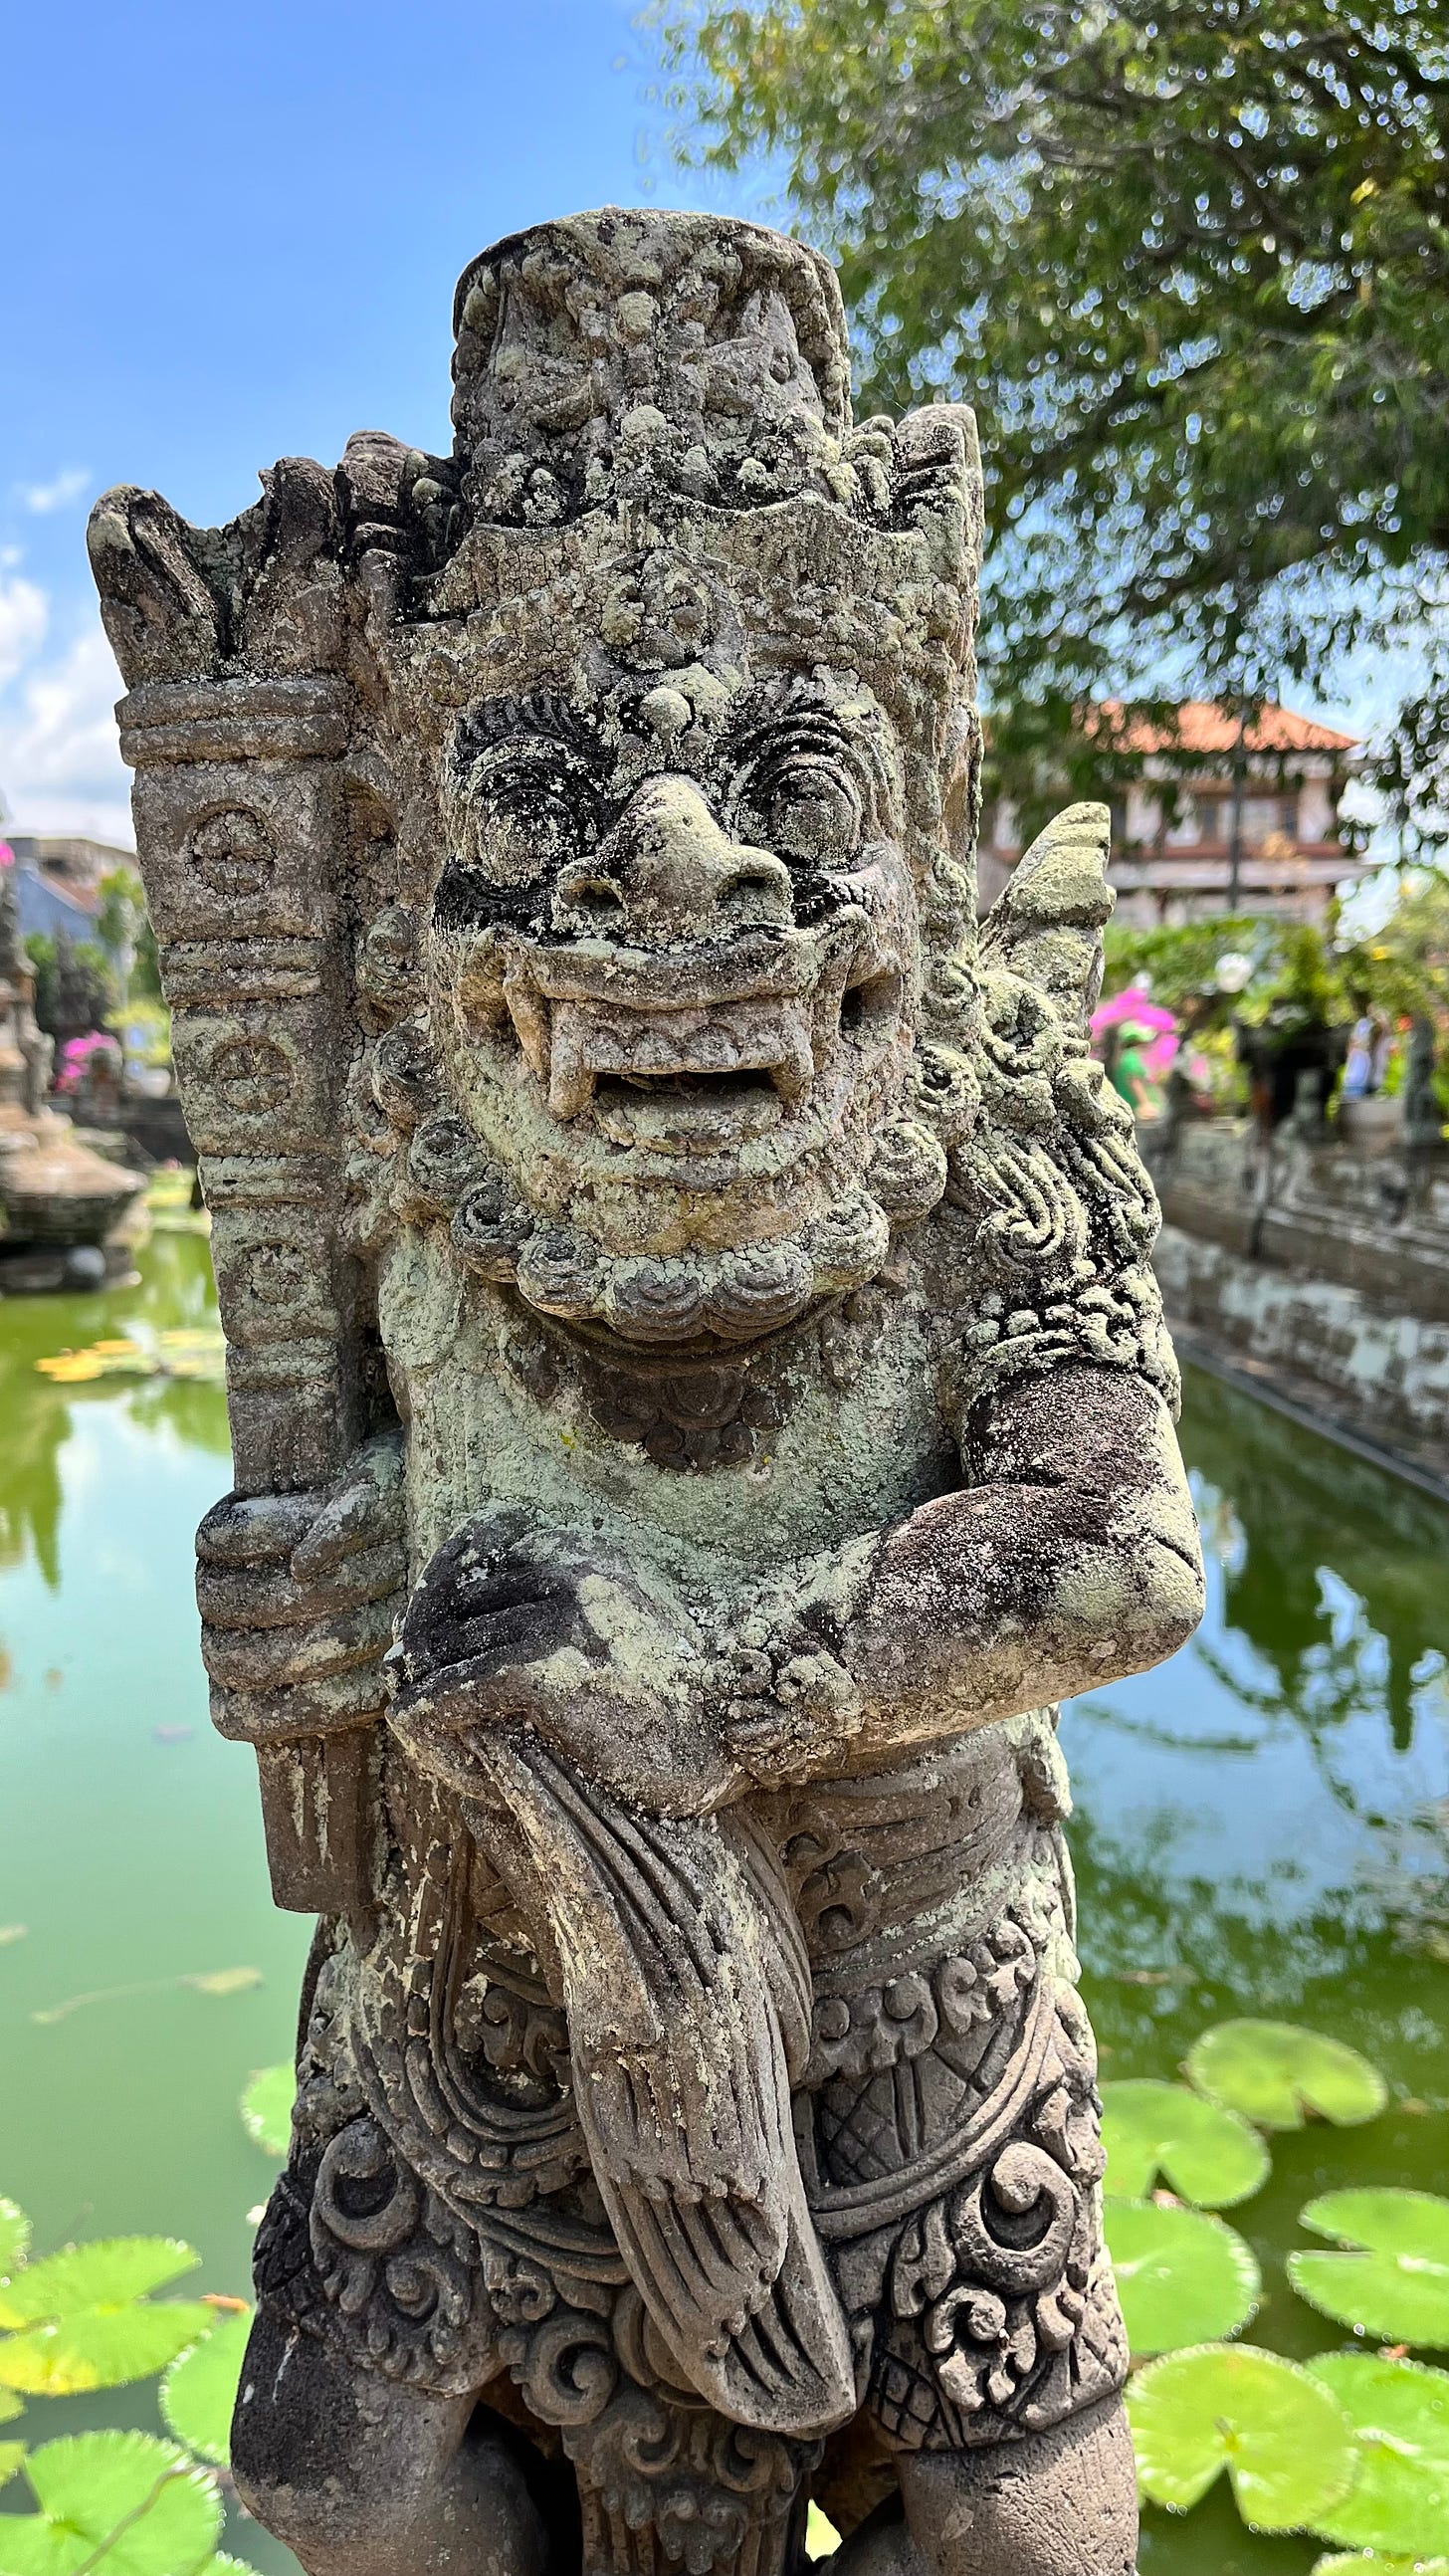 Statue of a Balinese Hindu guardian with weapons in his hands